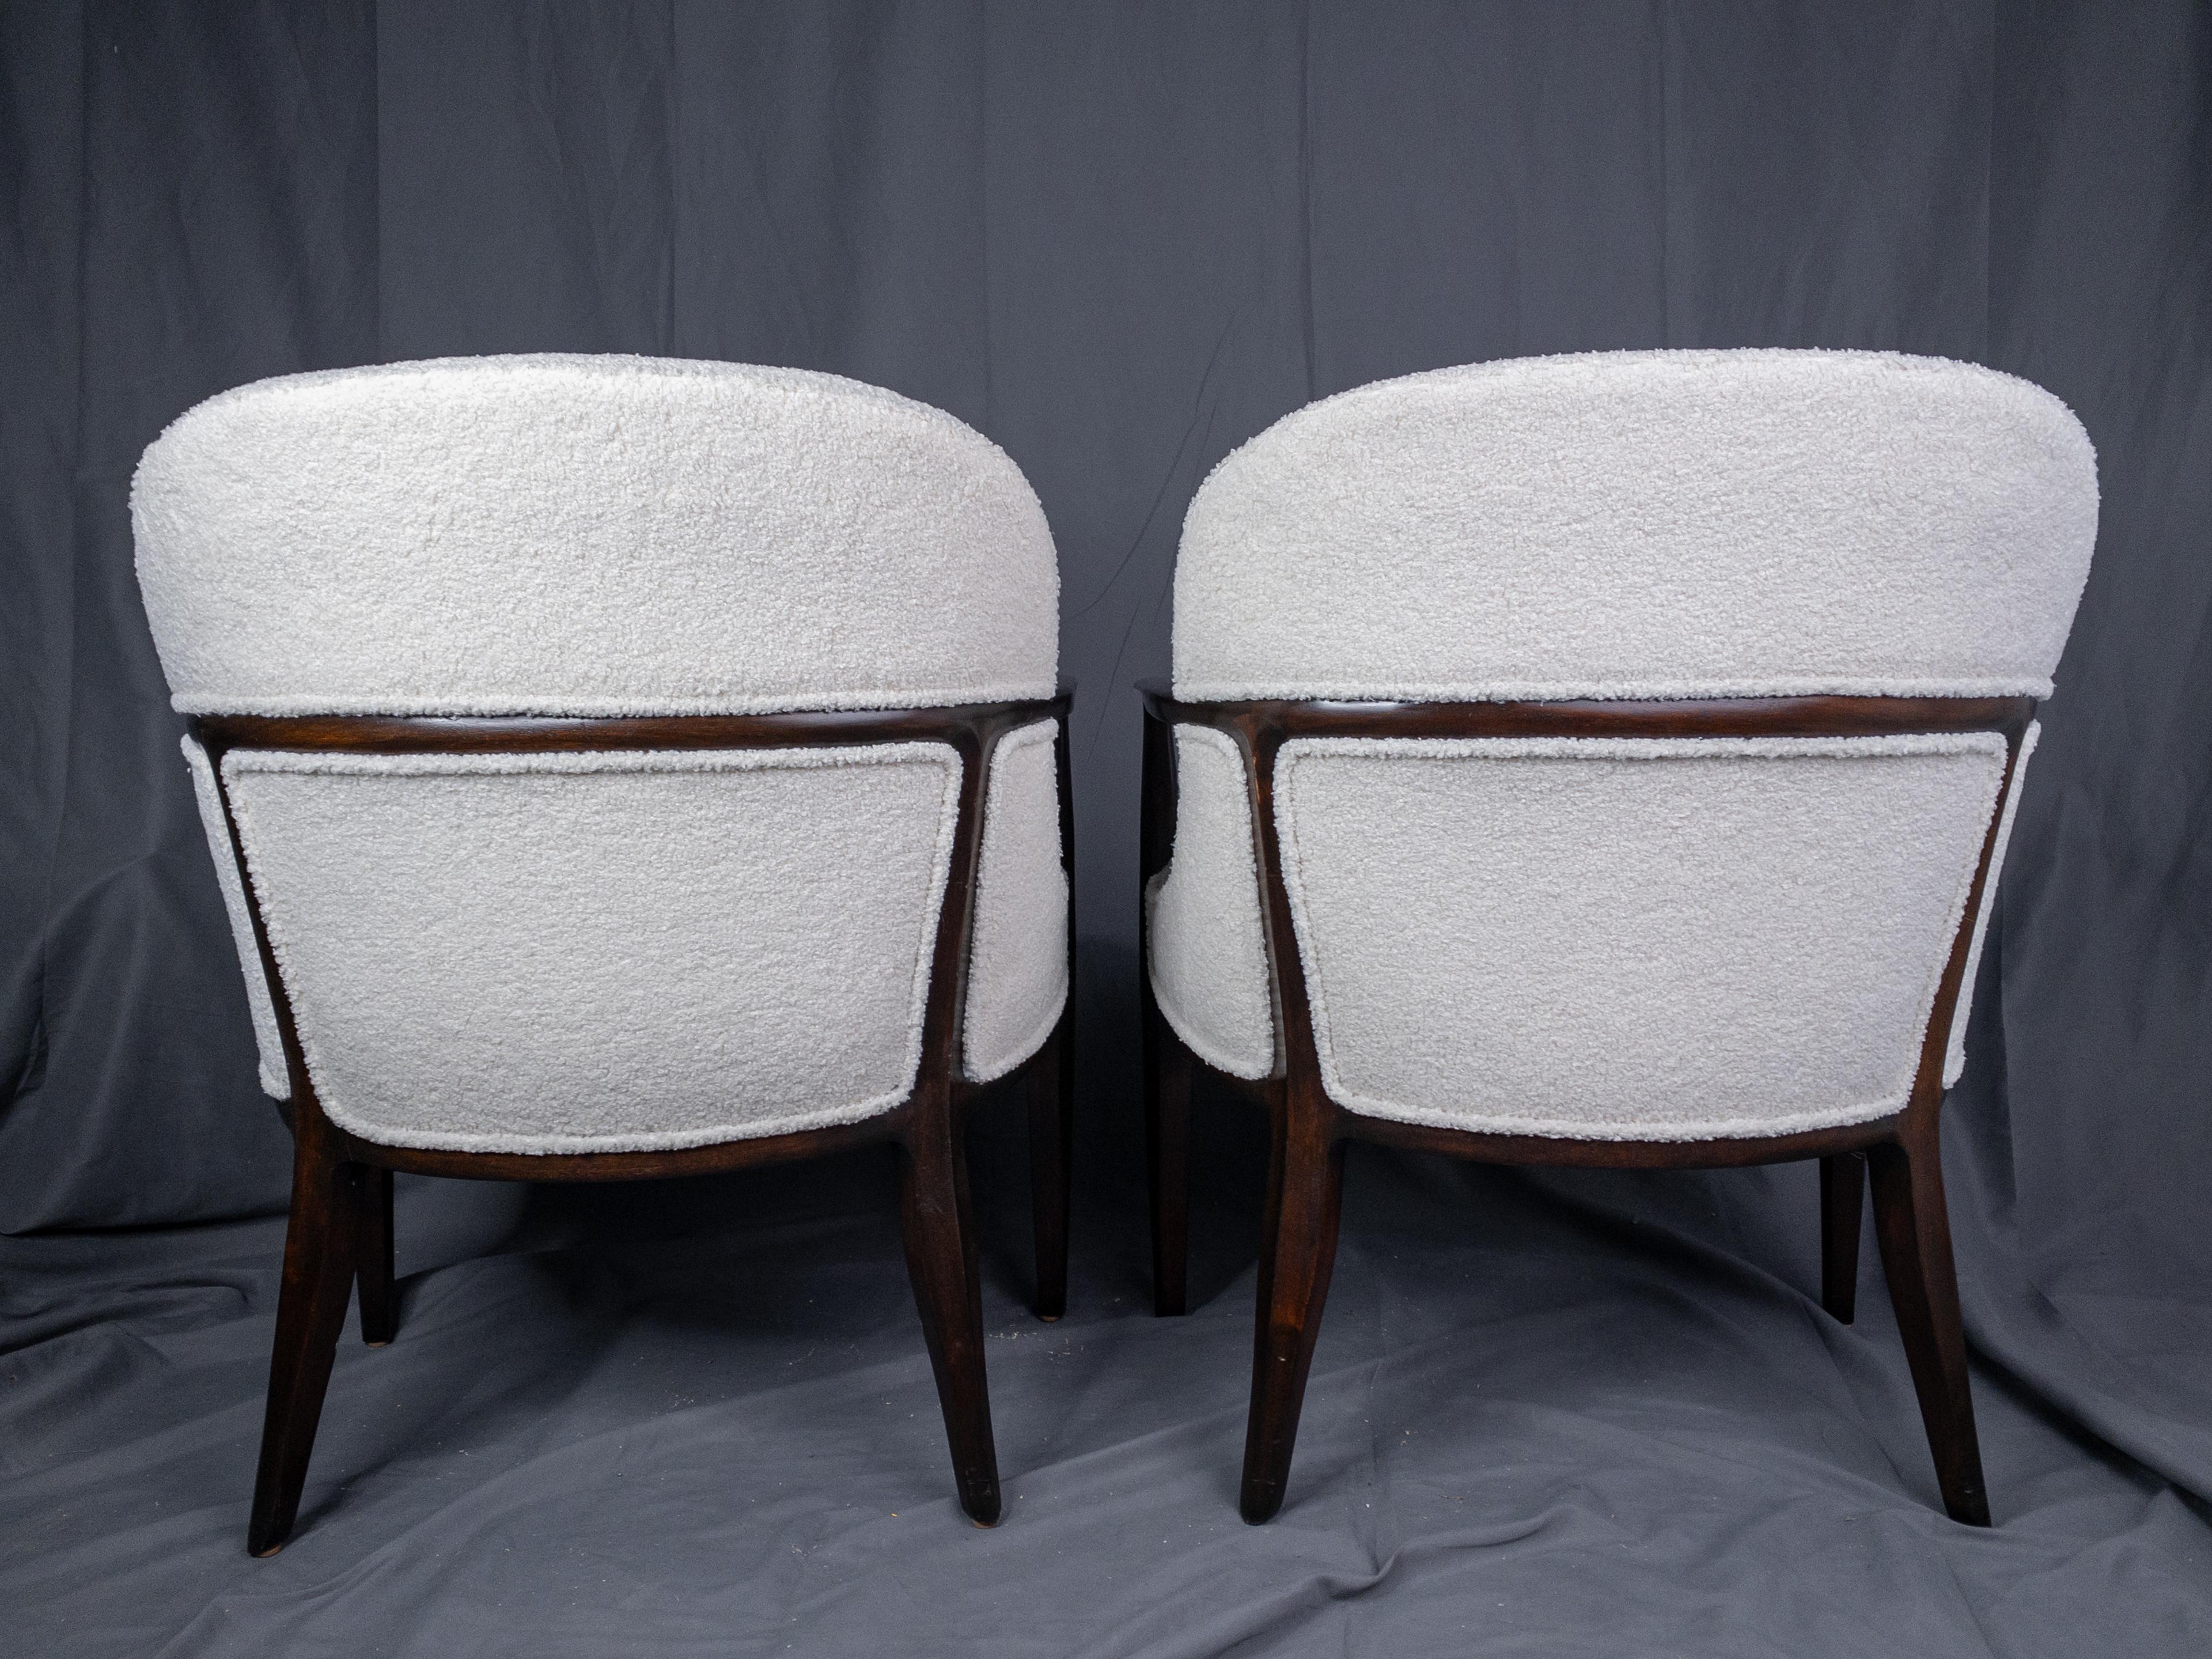 Pair of Edward Wormley Rosewood Janus Lounge Chairs in Bouclé Fabric for Dunbar In Good Condition For Sale In Houston, TX